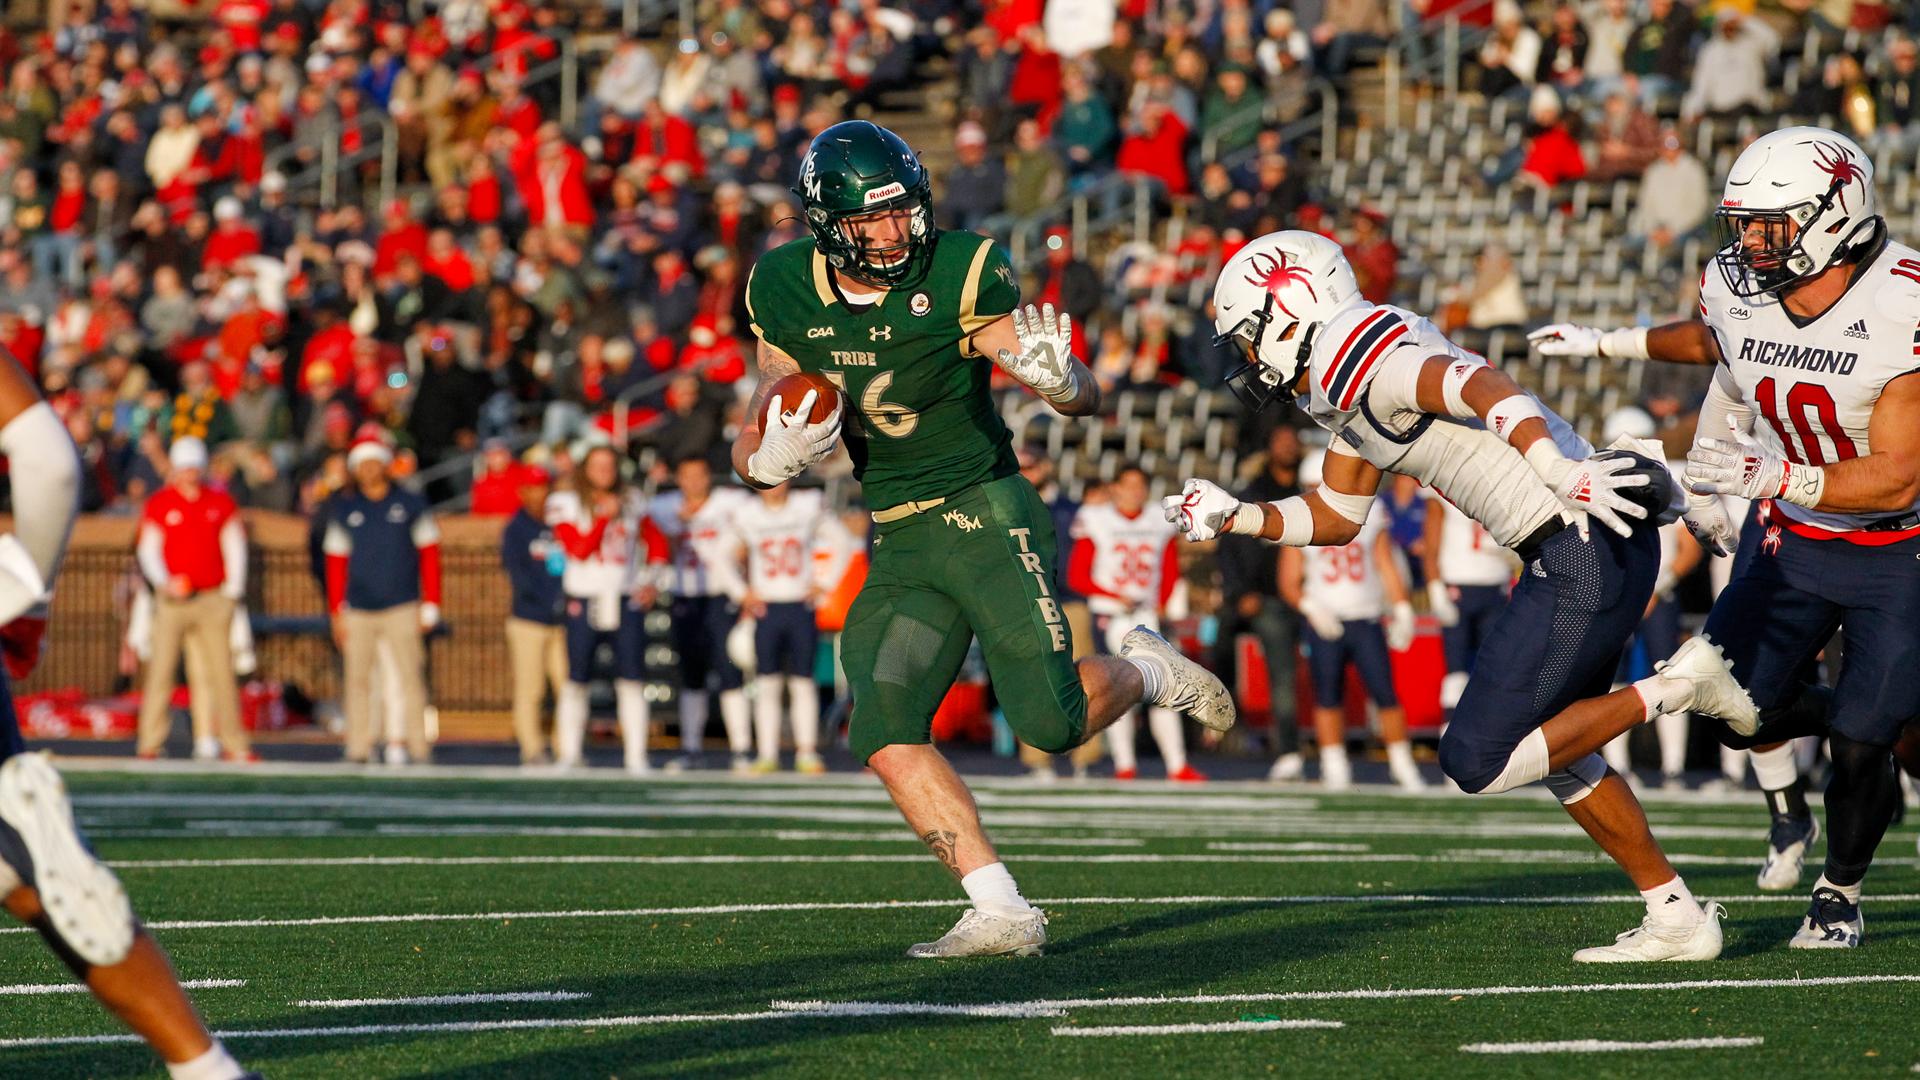 Bronson Yoder is a strong, physical bruiser of a back for William & Mary. He is a very dependable short-yardage runner. Hula Bowl scout Justyce Gordon breaks down Yoder as an NFL Prospect in his report.